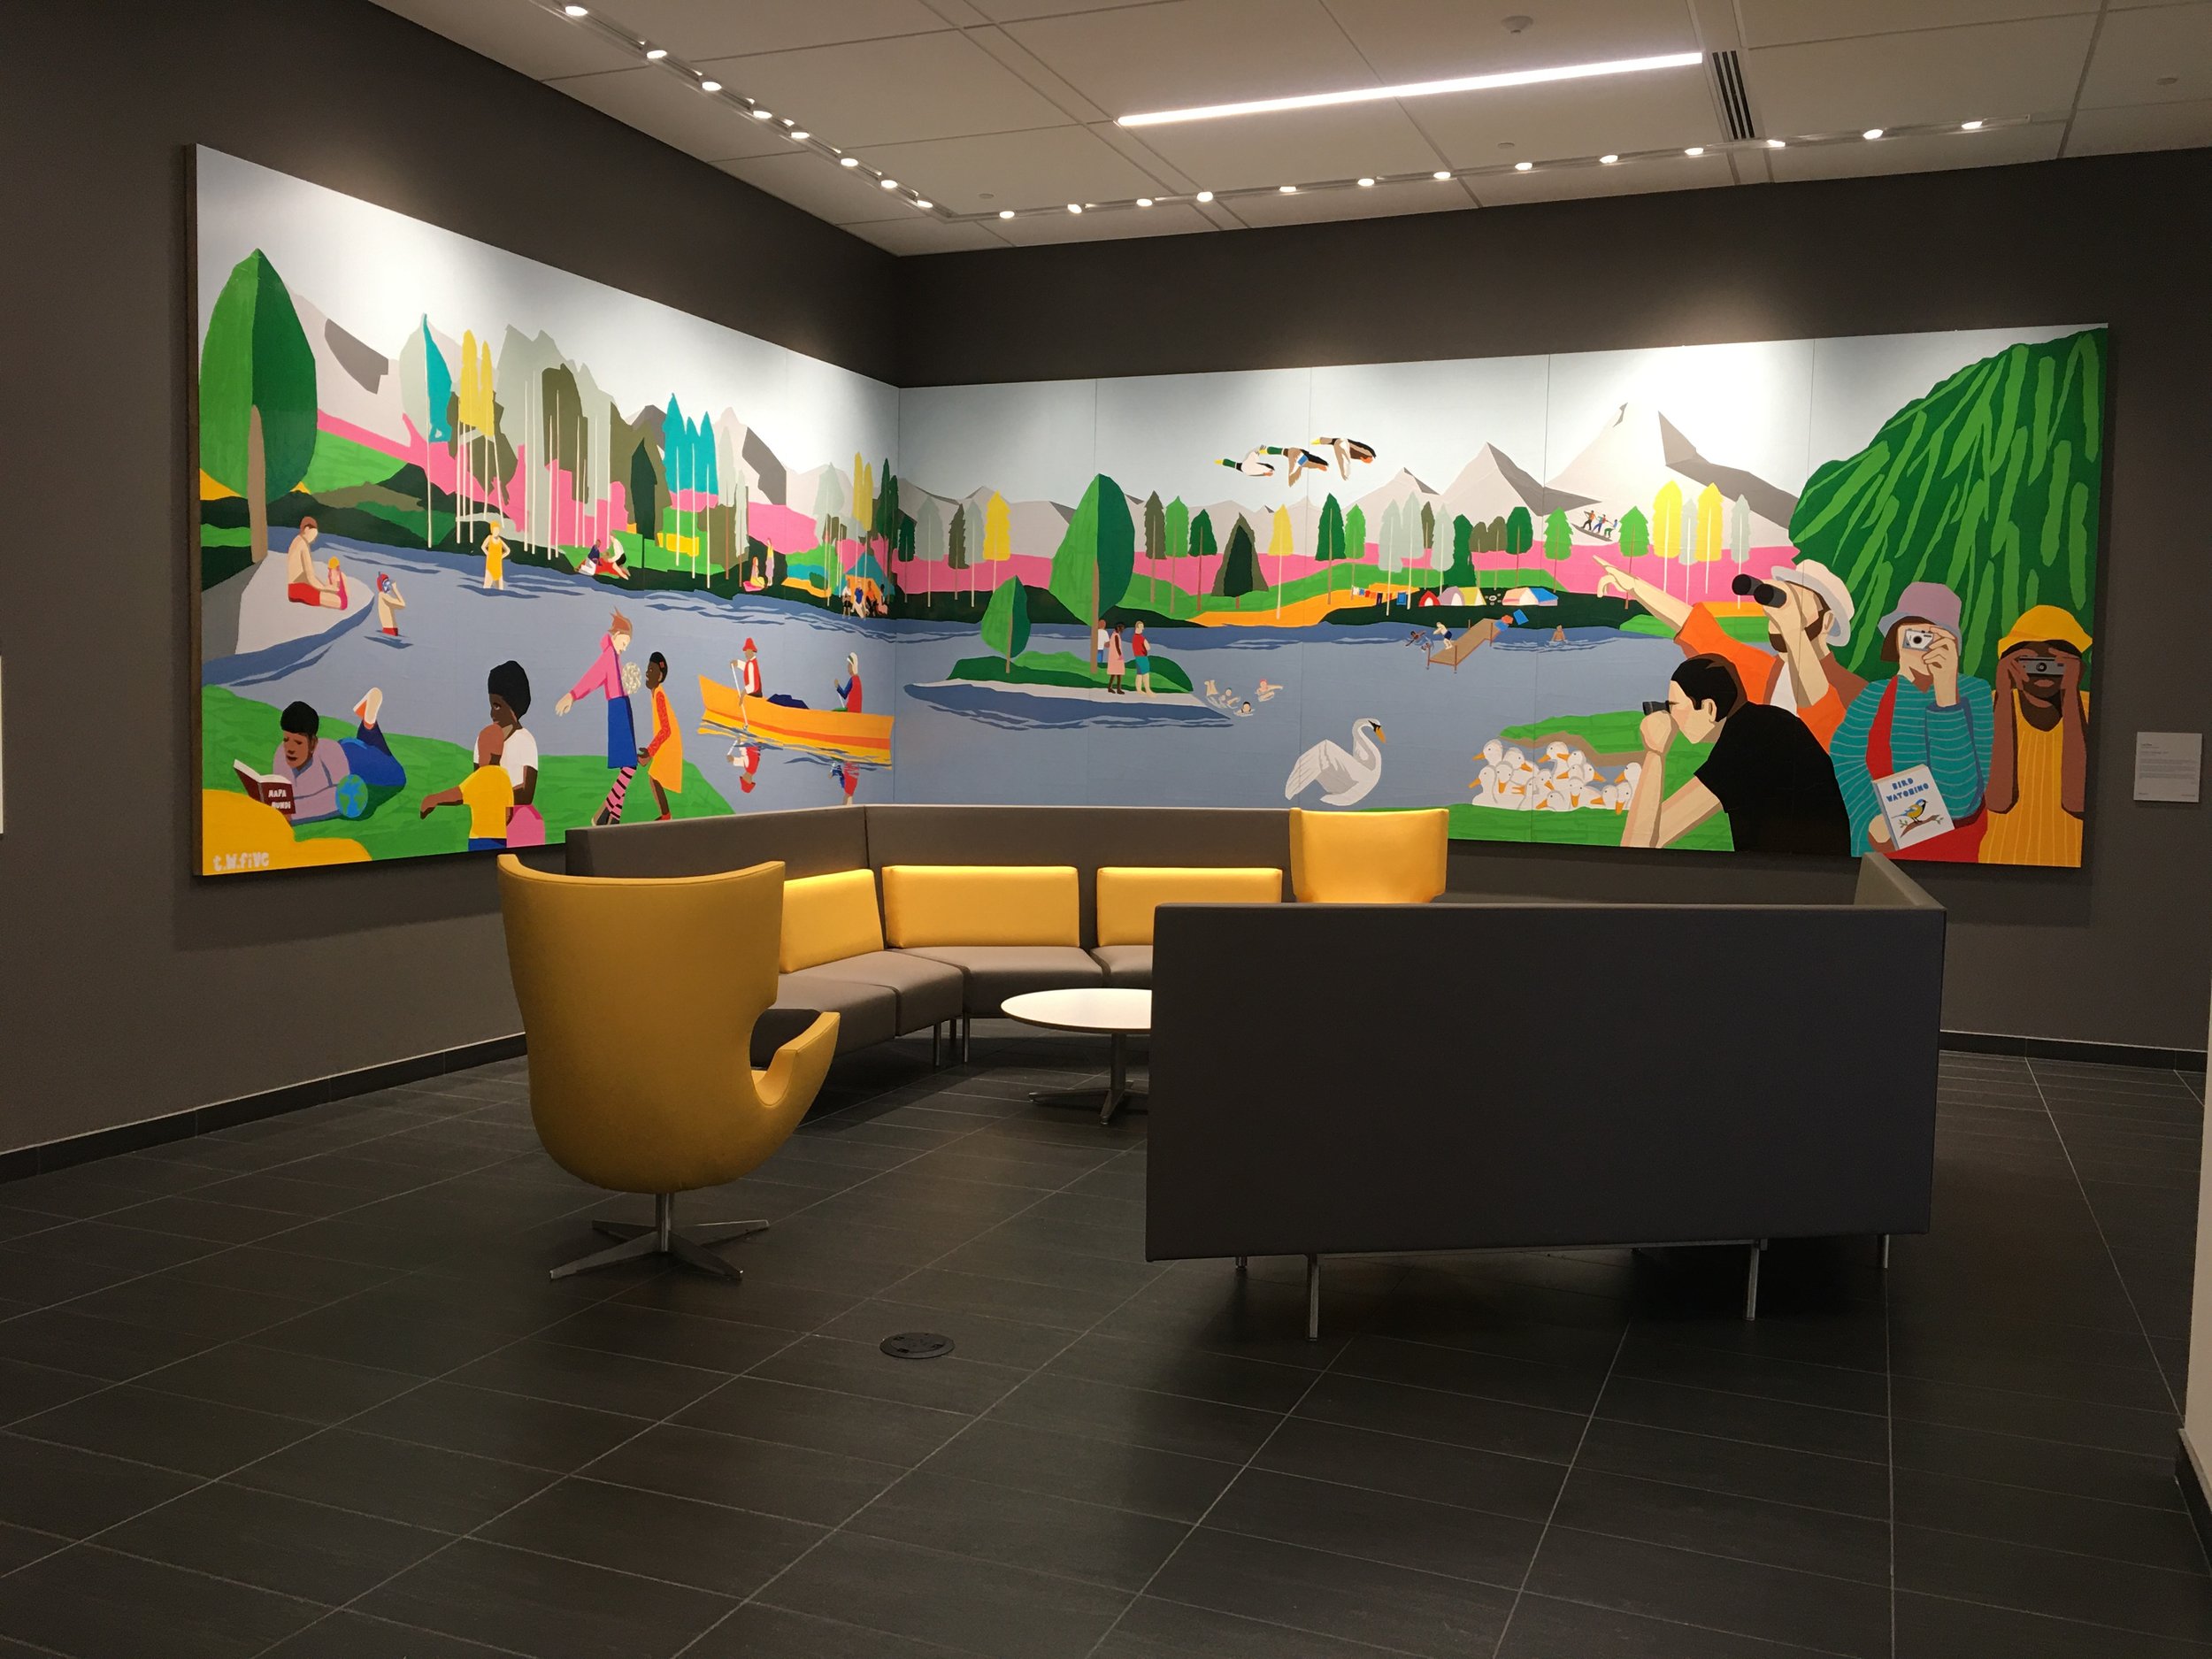 PCMB_Lobby Mural_landscape with furniture.JPG